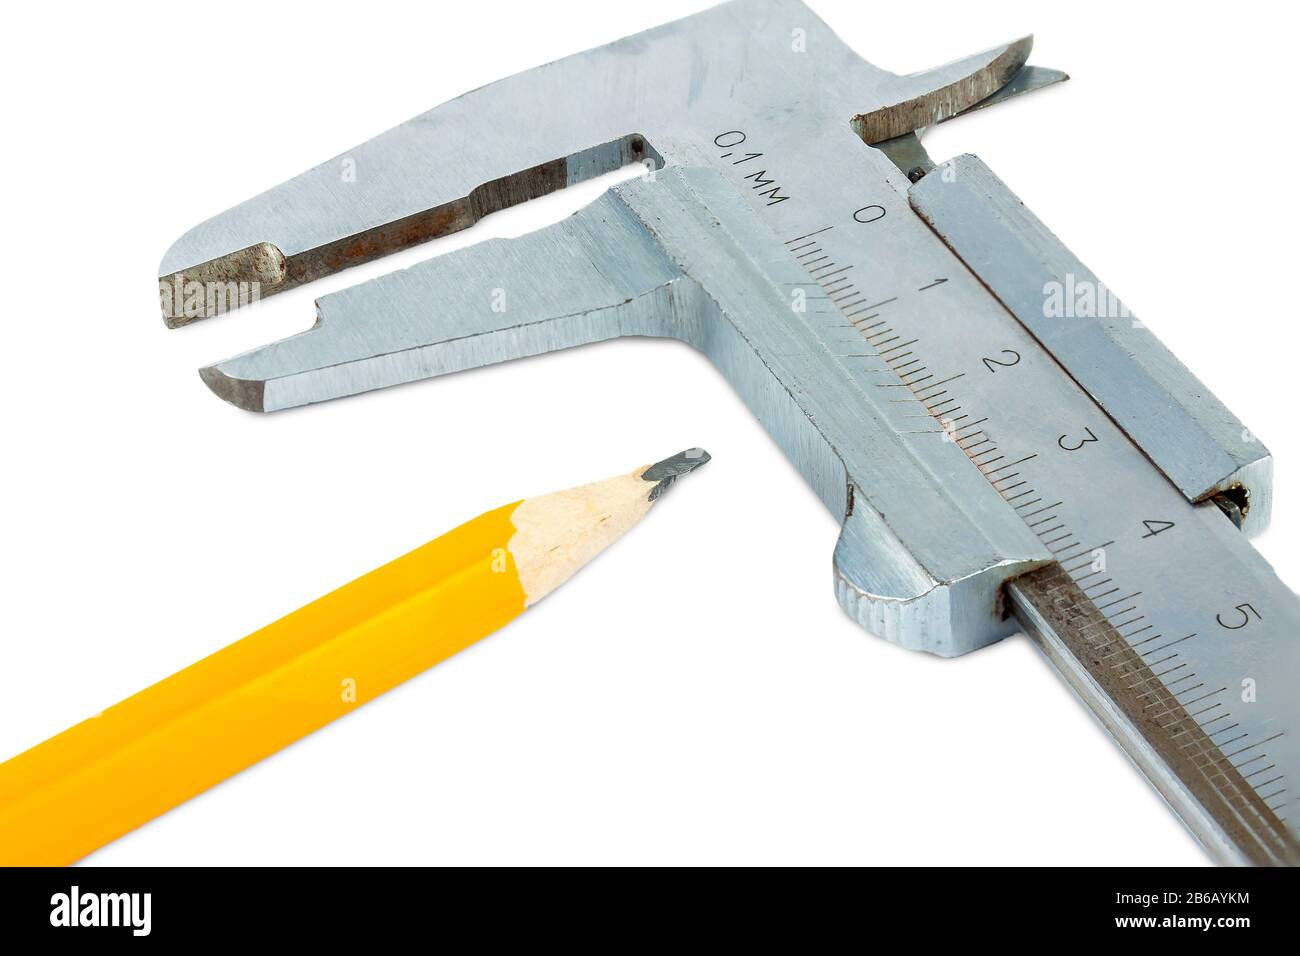 Pencil and vernier caliper close-up on a white background. Stock Photo